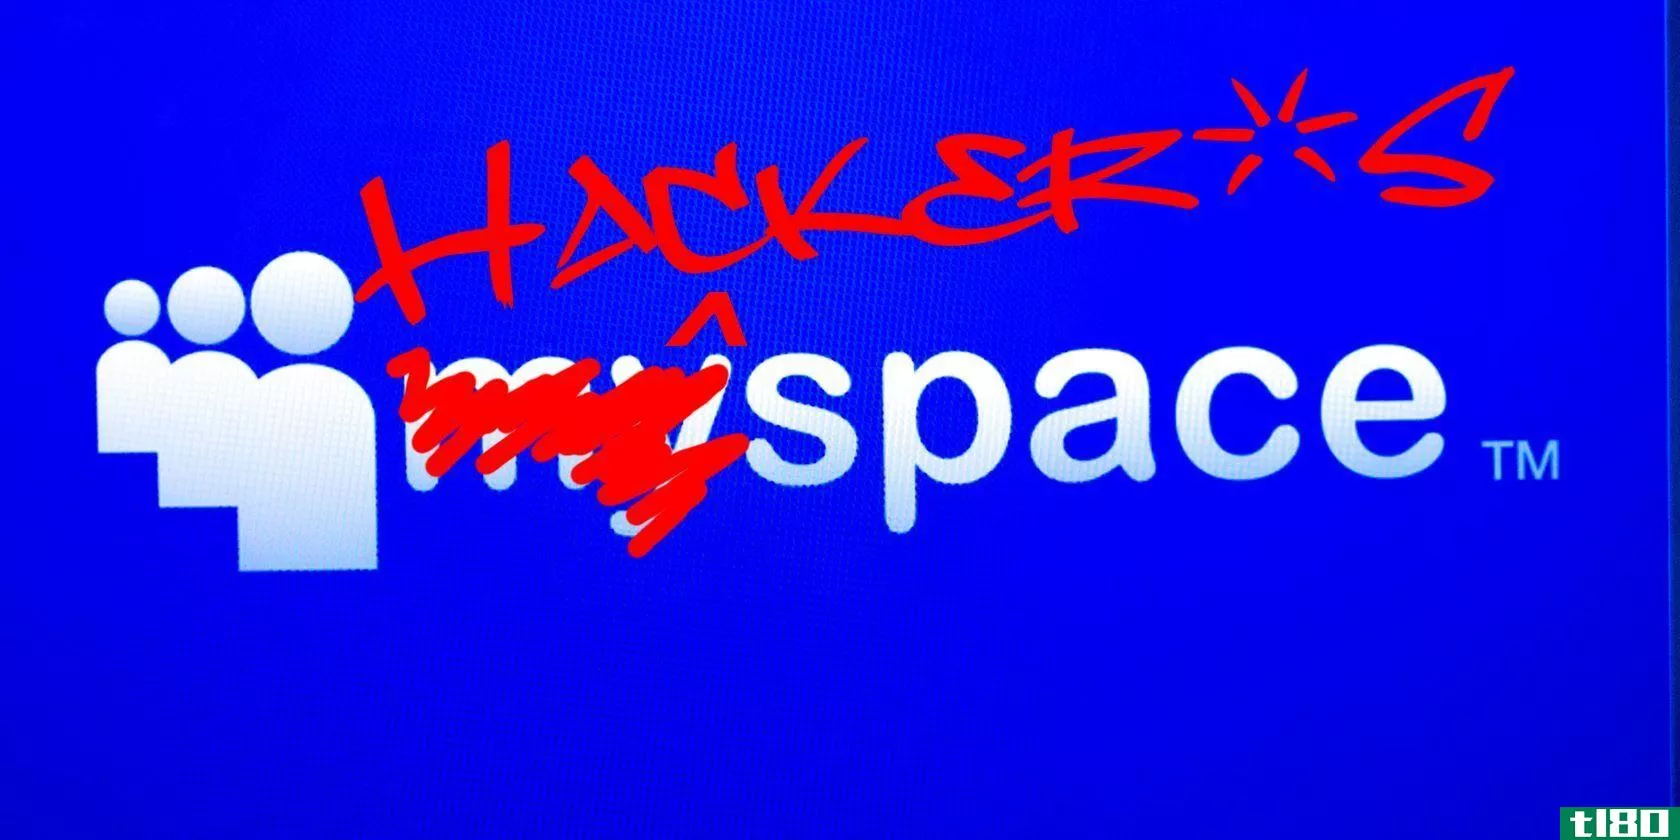 myspace-hacking-featured